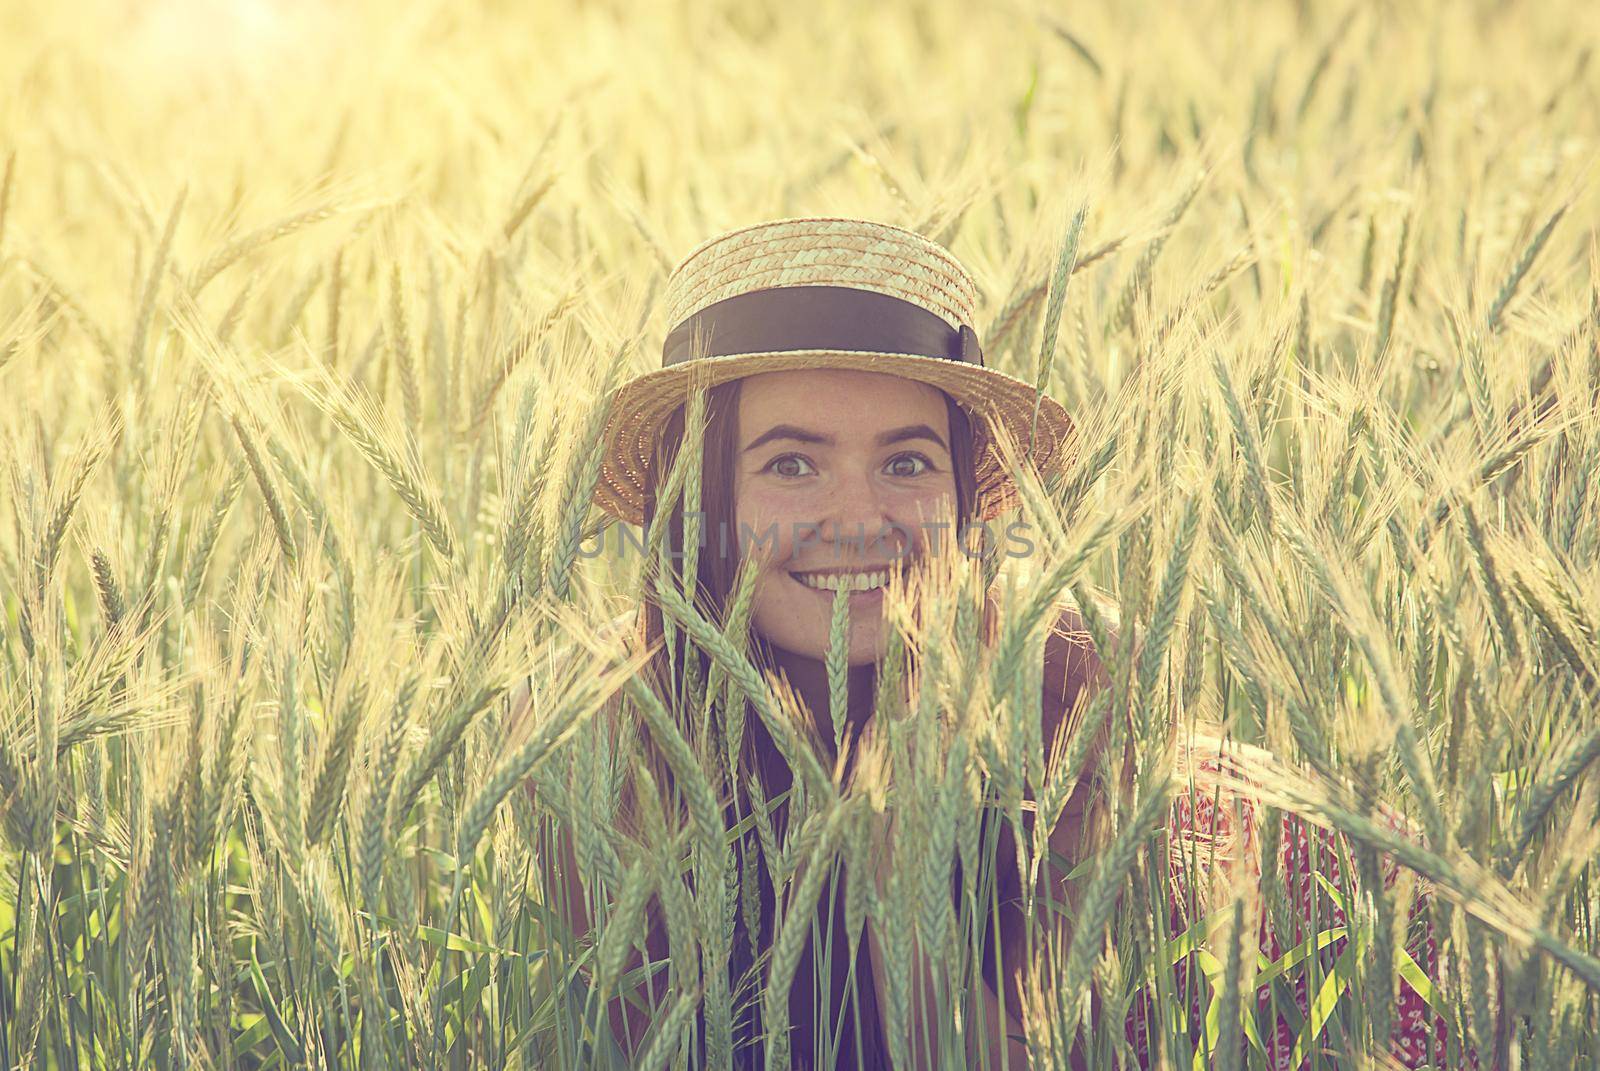 young woman in straw hat in the middle of wheat field